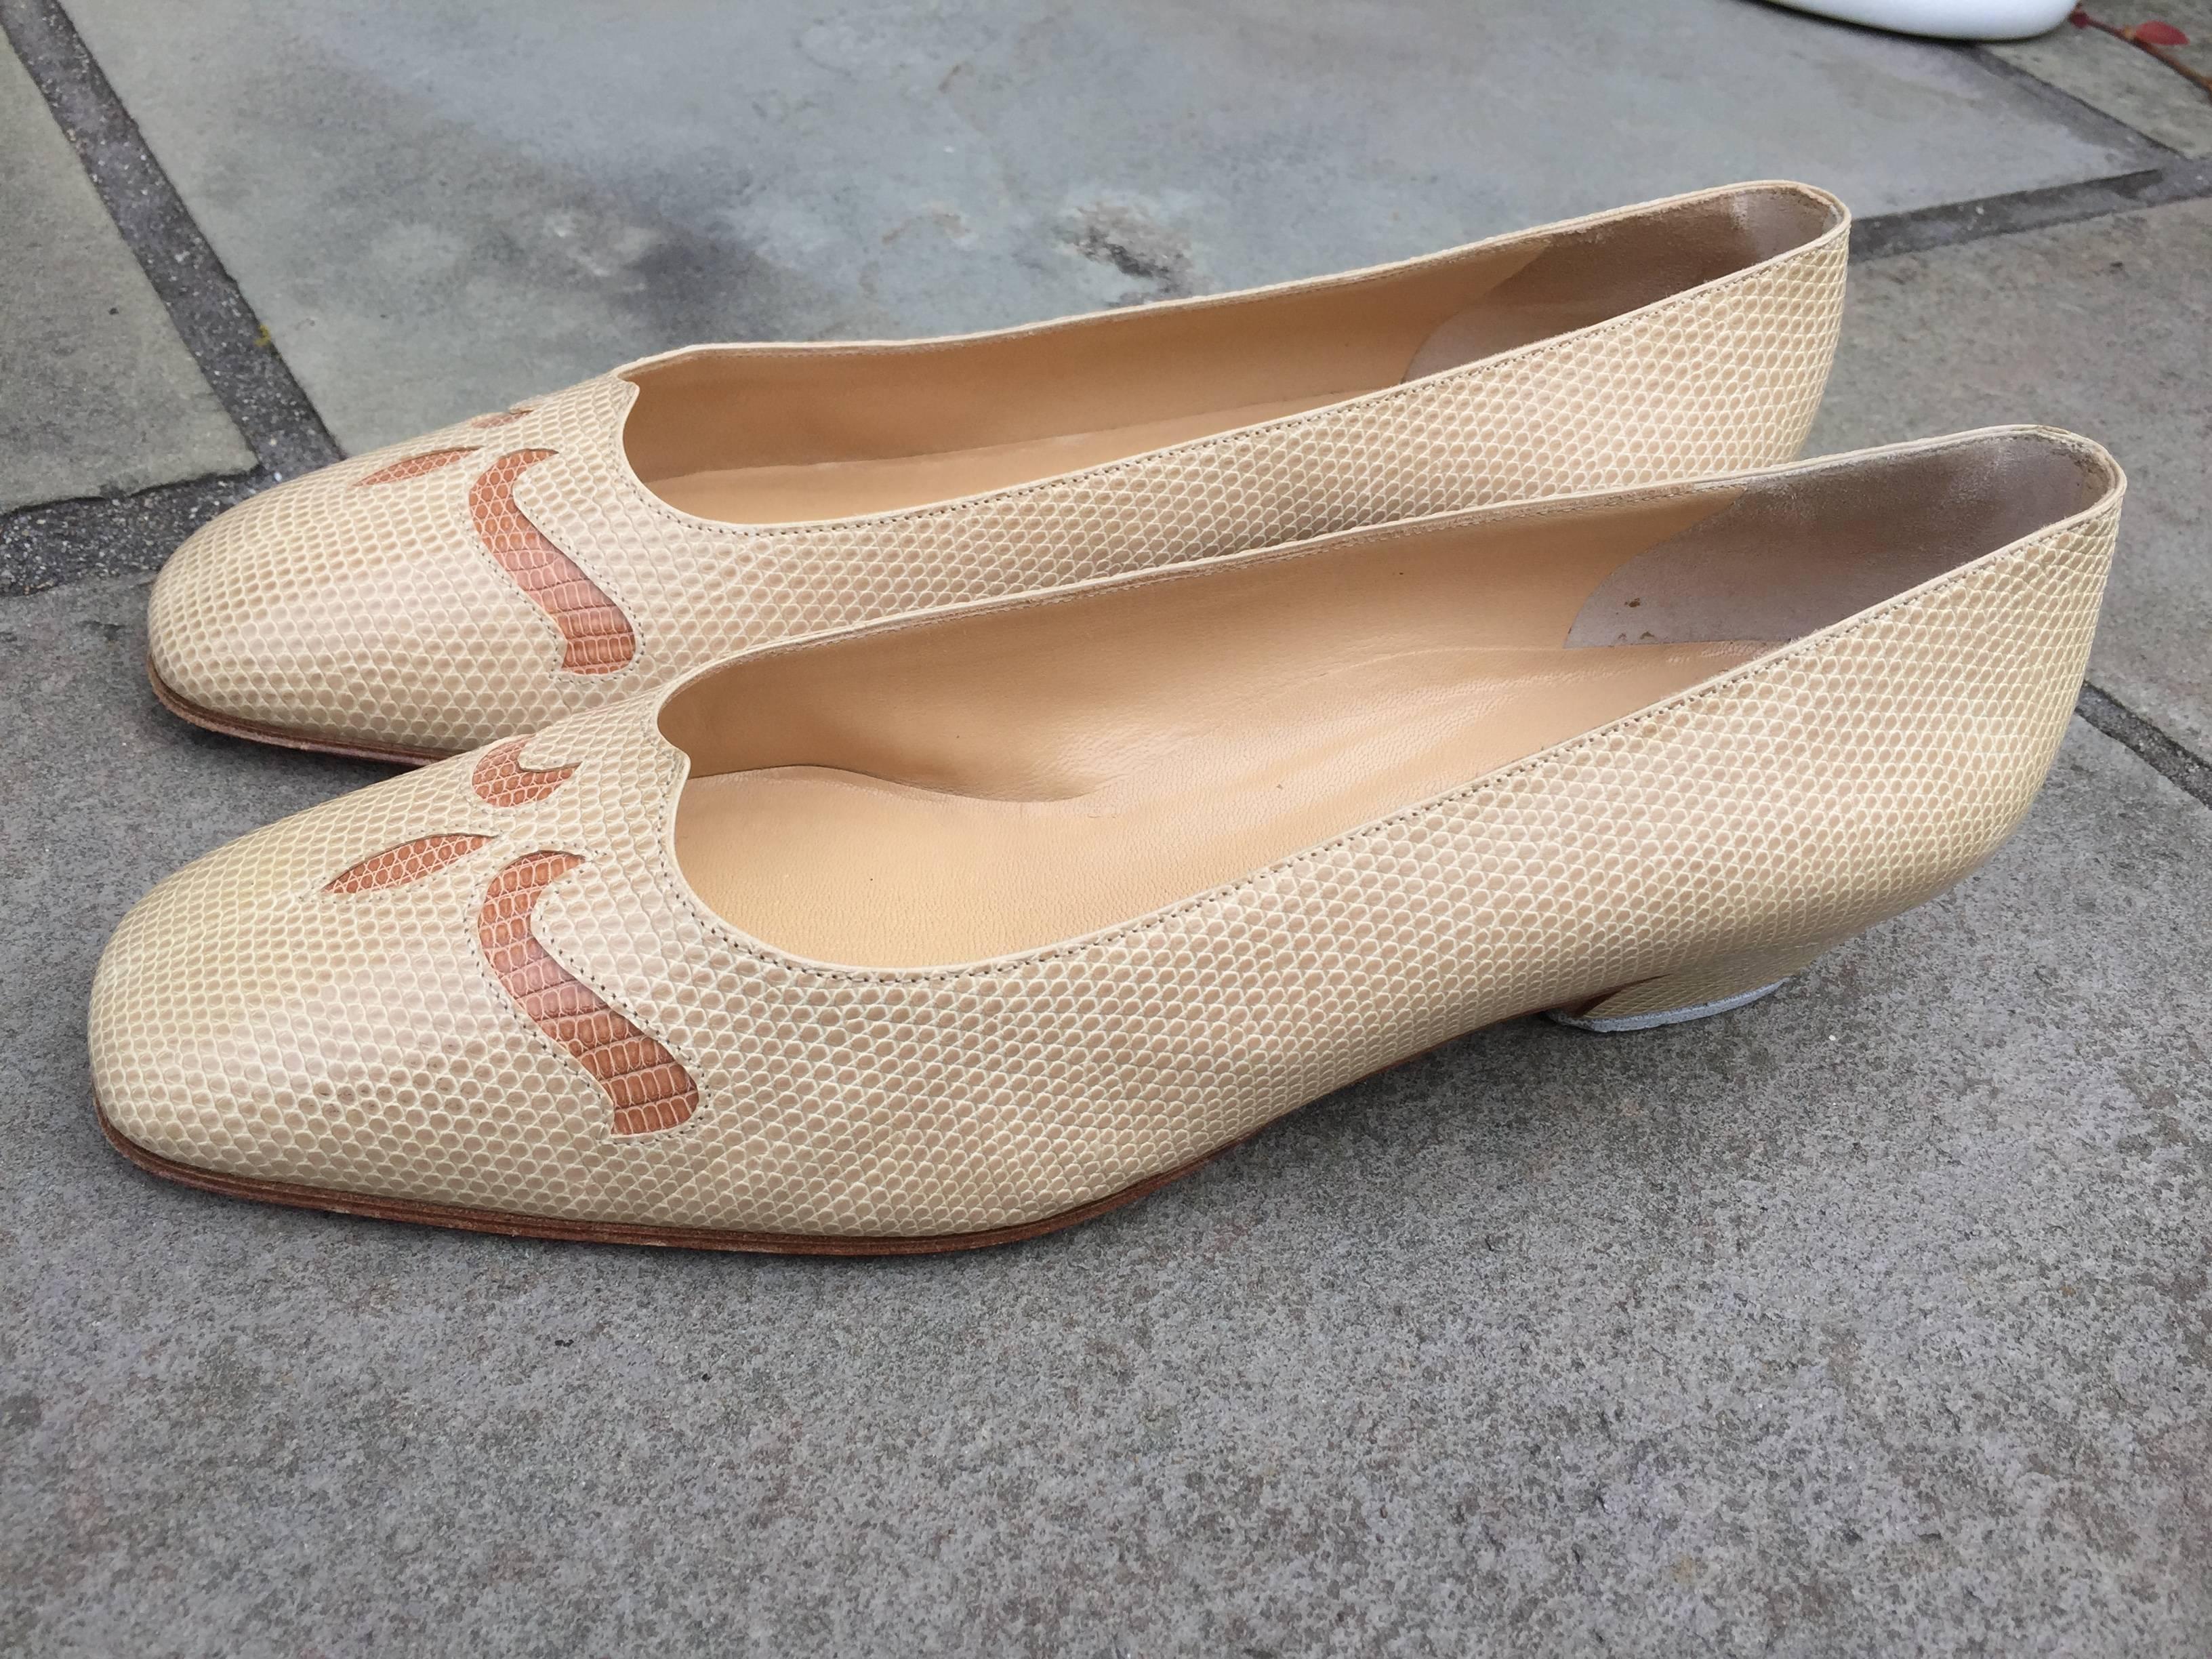 Helene Arpels Couture, Paris Two Tone Lizard Flats In Excellent Condition For Sale In Cloverdale, CA